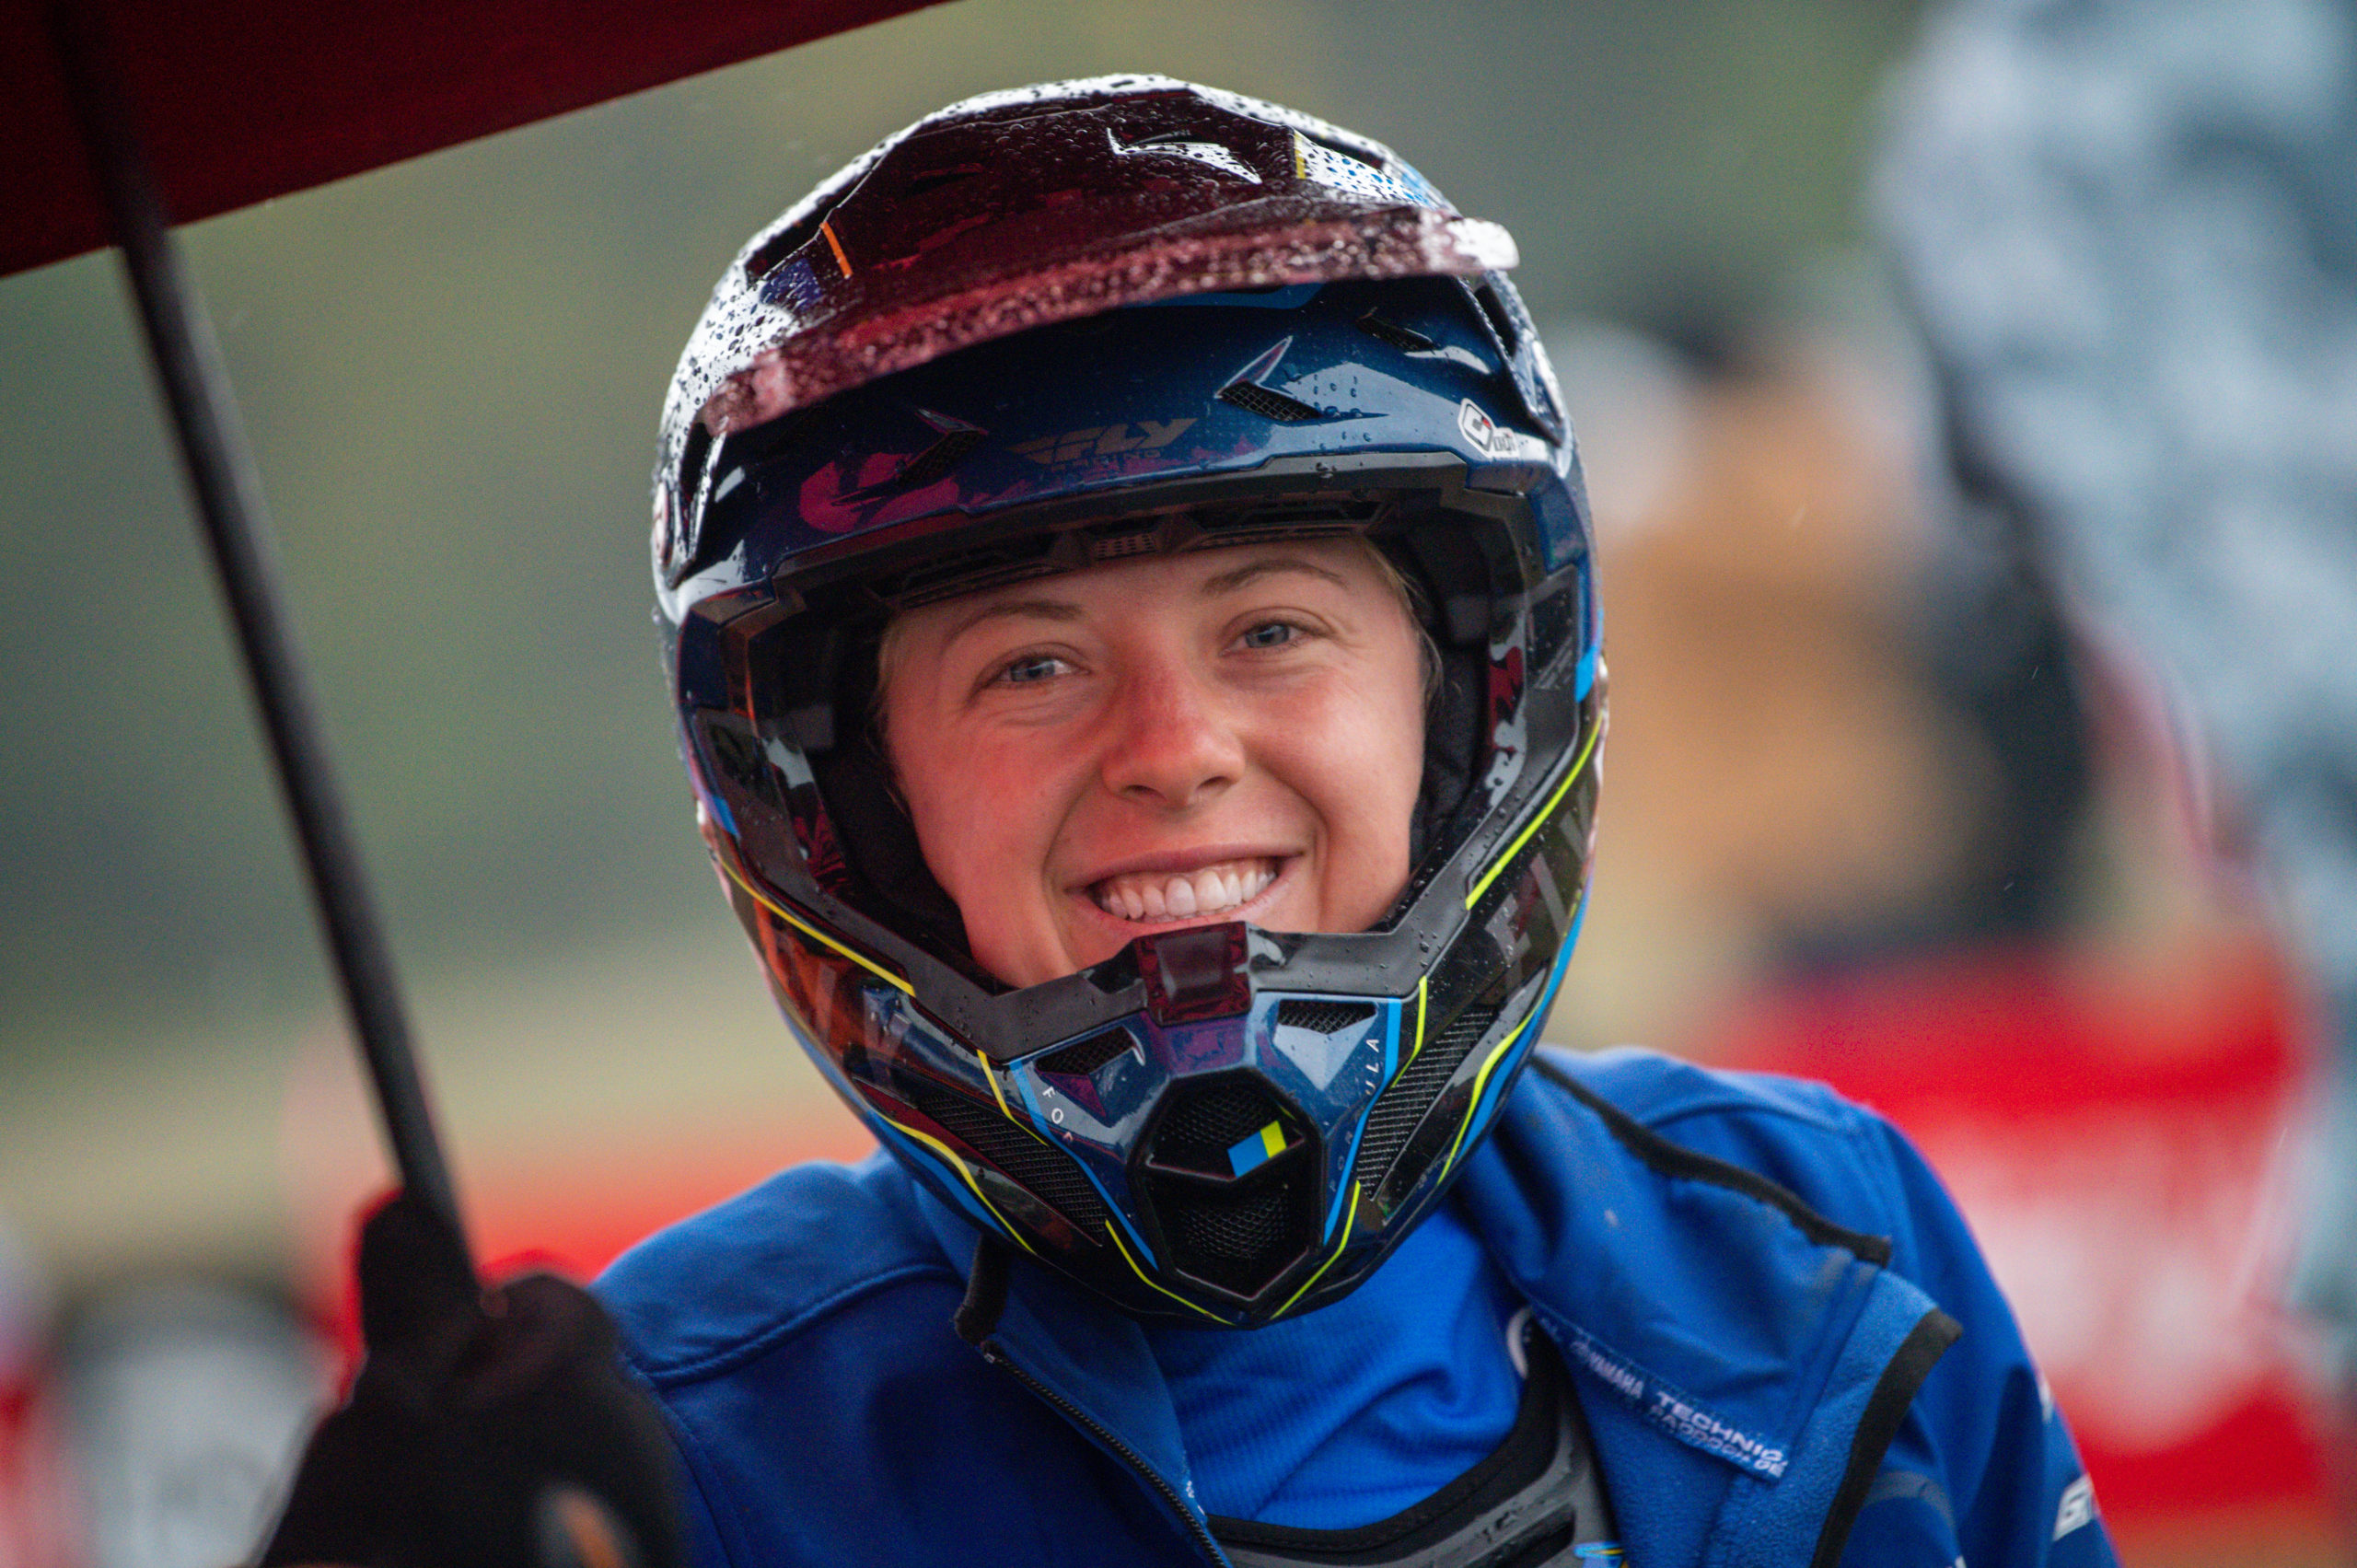 Becca Sheets sporting her pre smile at the Ironman MX GNCC.